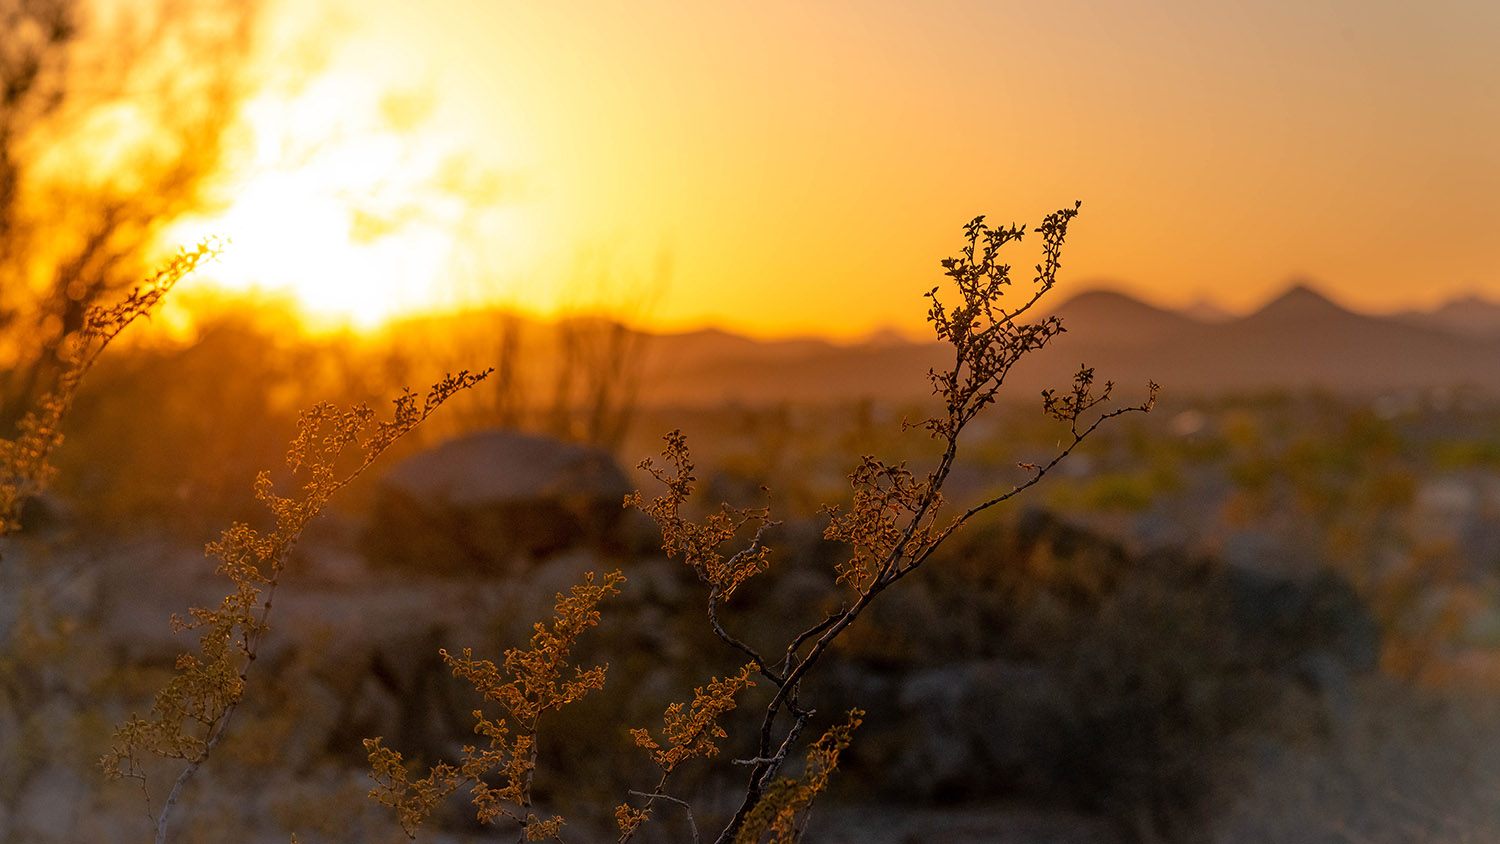 Photo with plants in the foreground and a warm colored desert sunset in the background